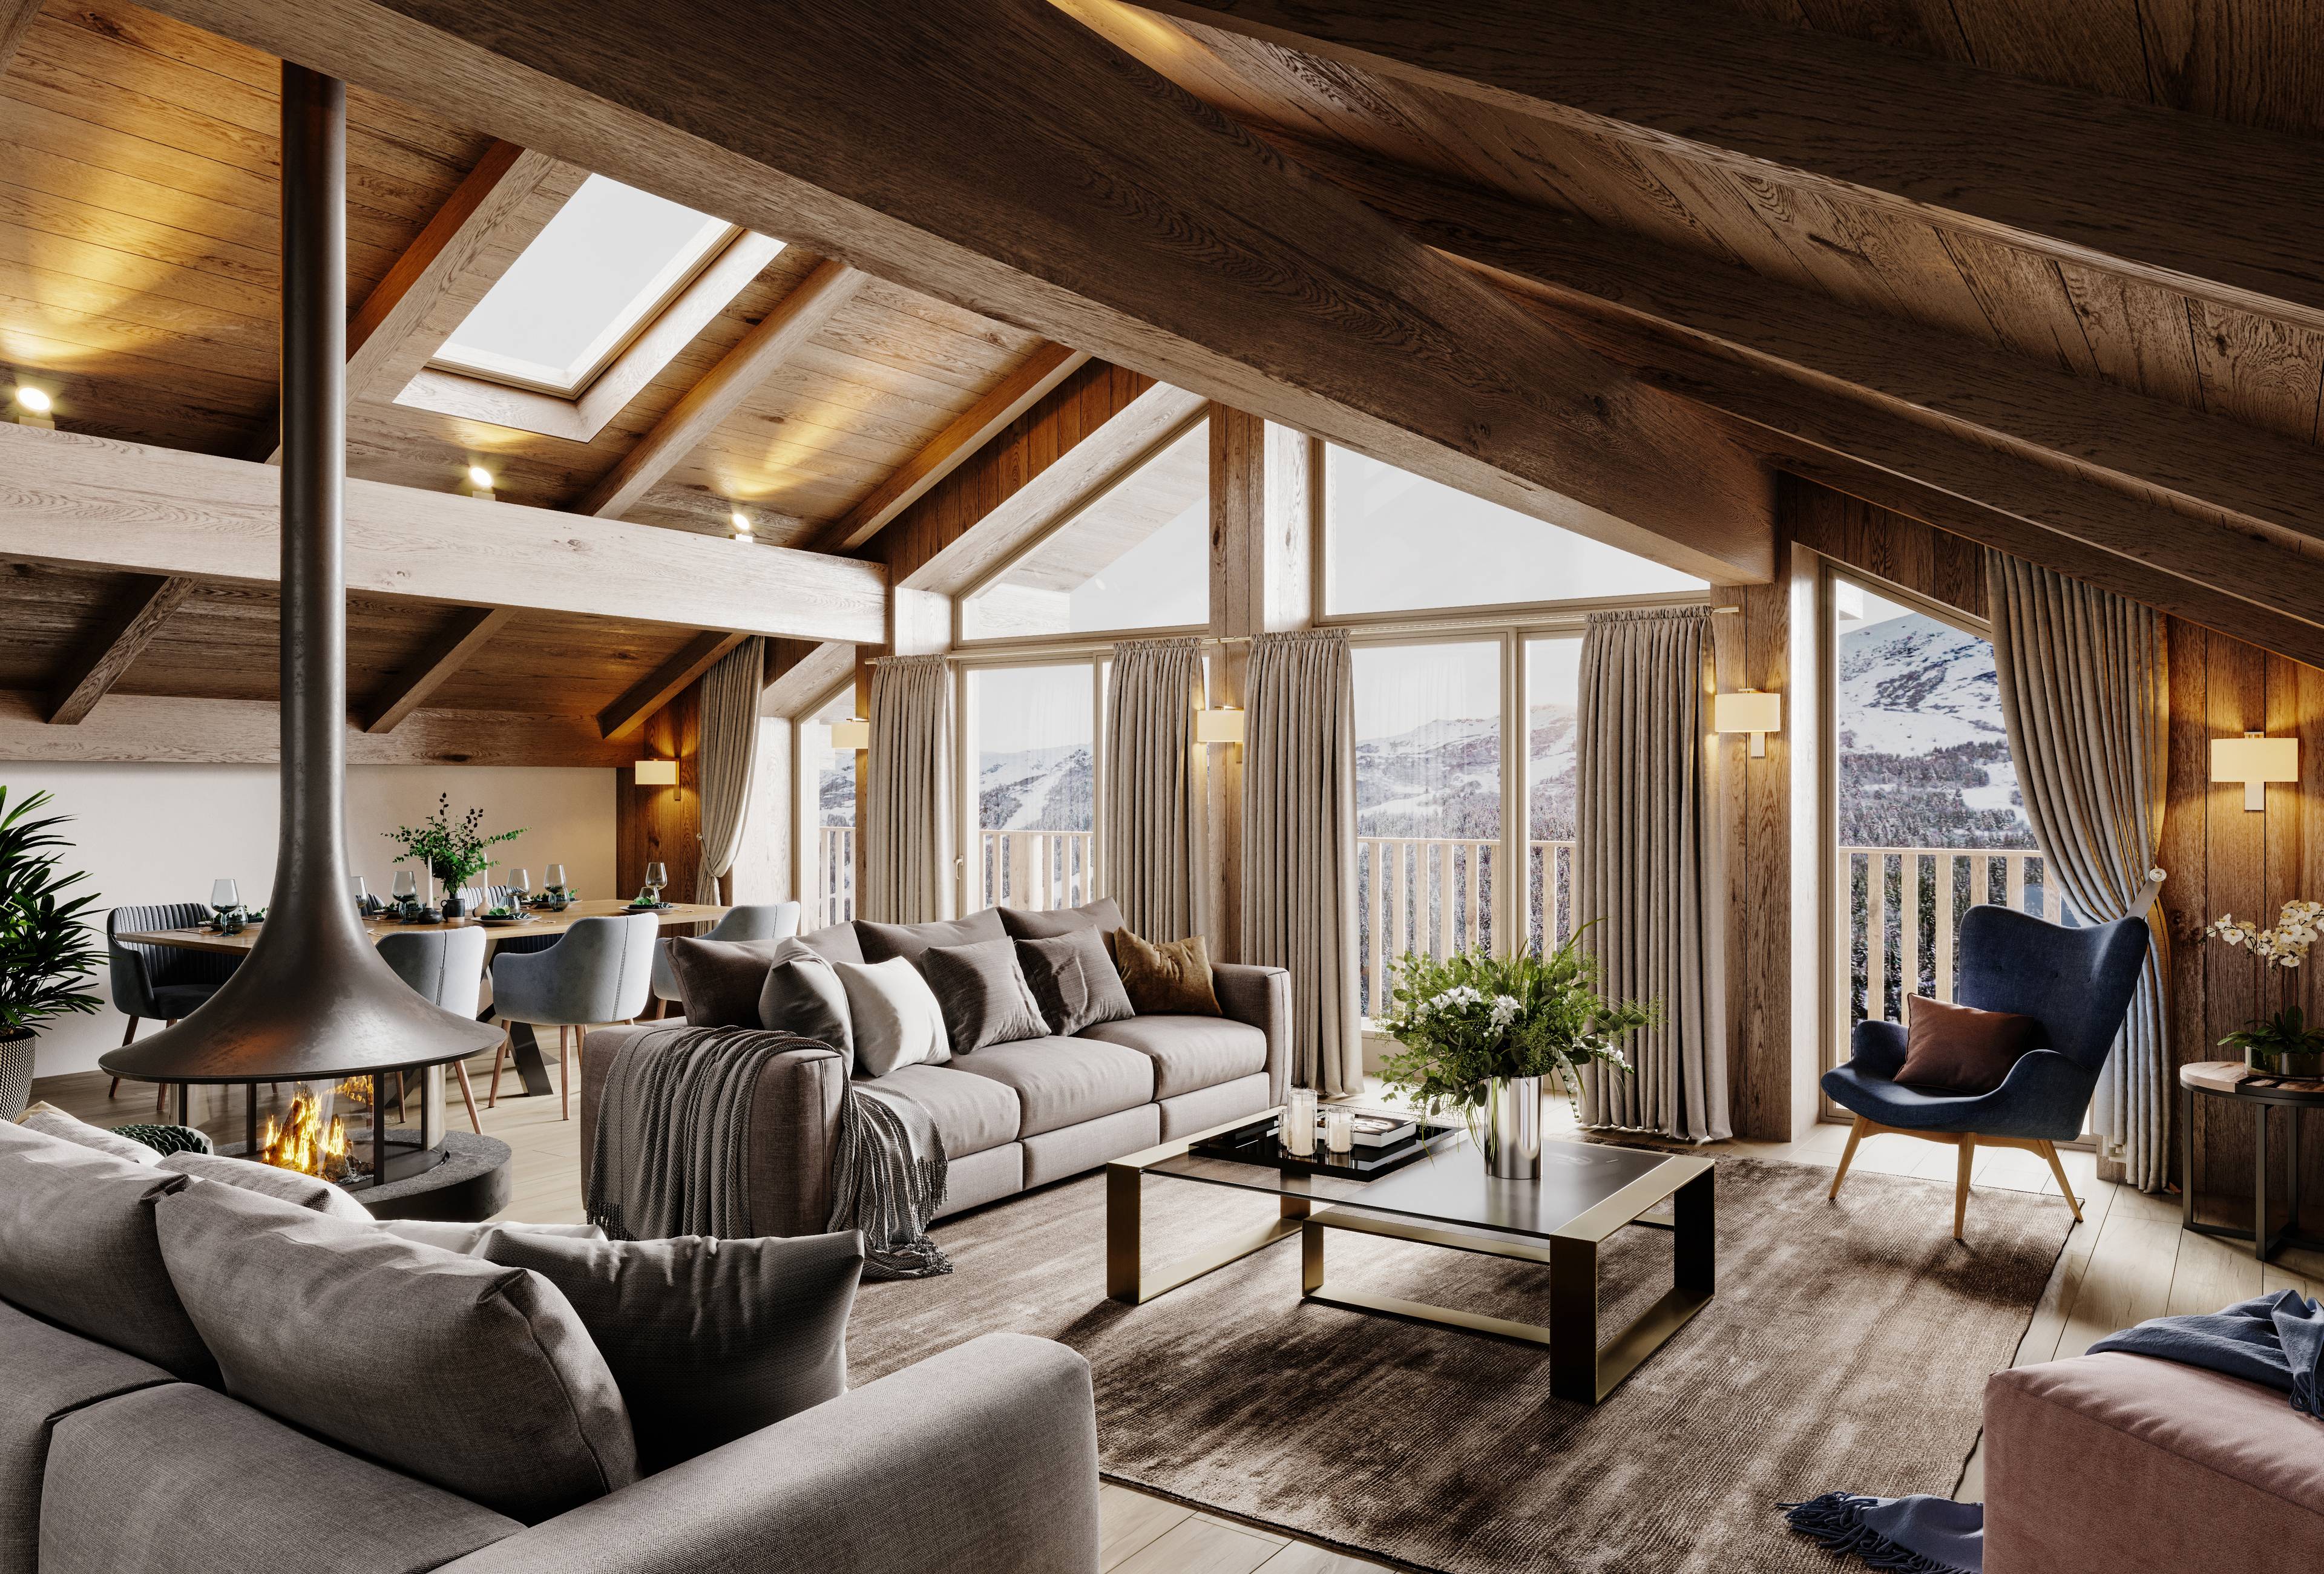 Brand new Luxury Chalet in Three Valleys Meribel delivered for Christmas 2023